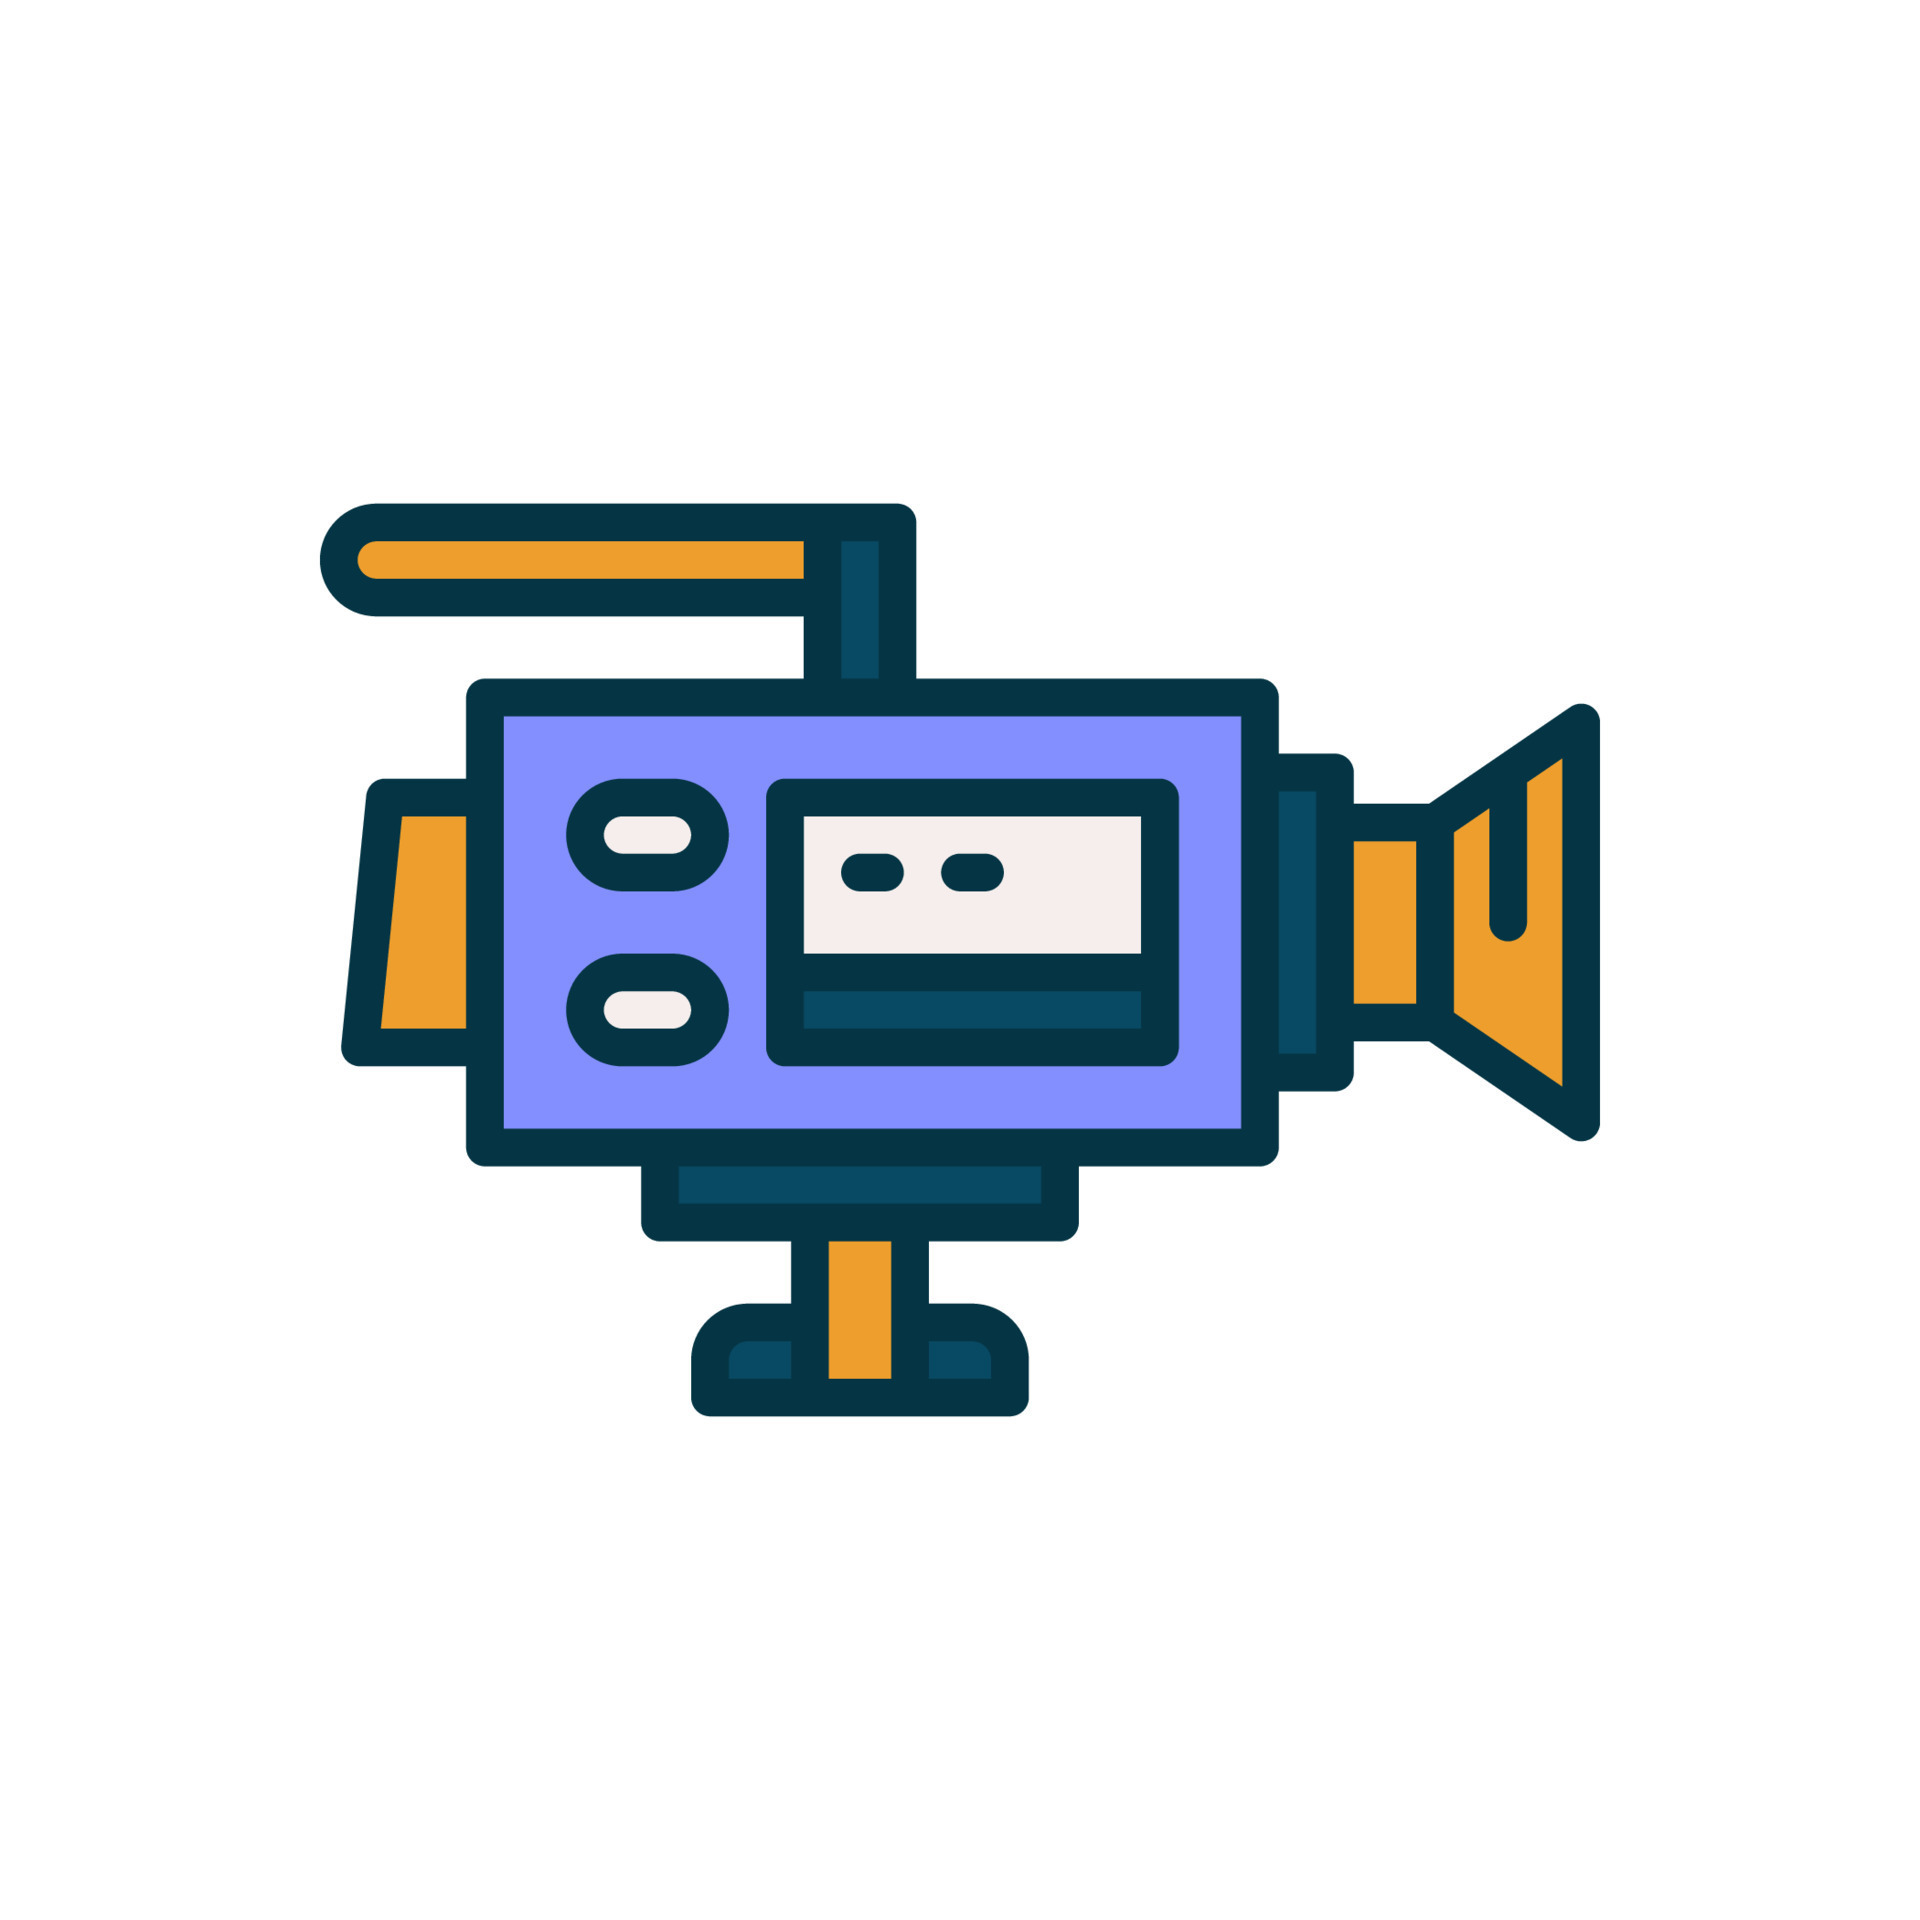 Video camera - Free technology icons